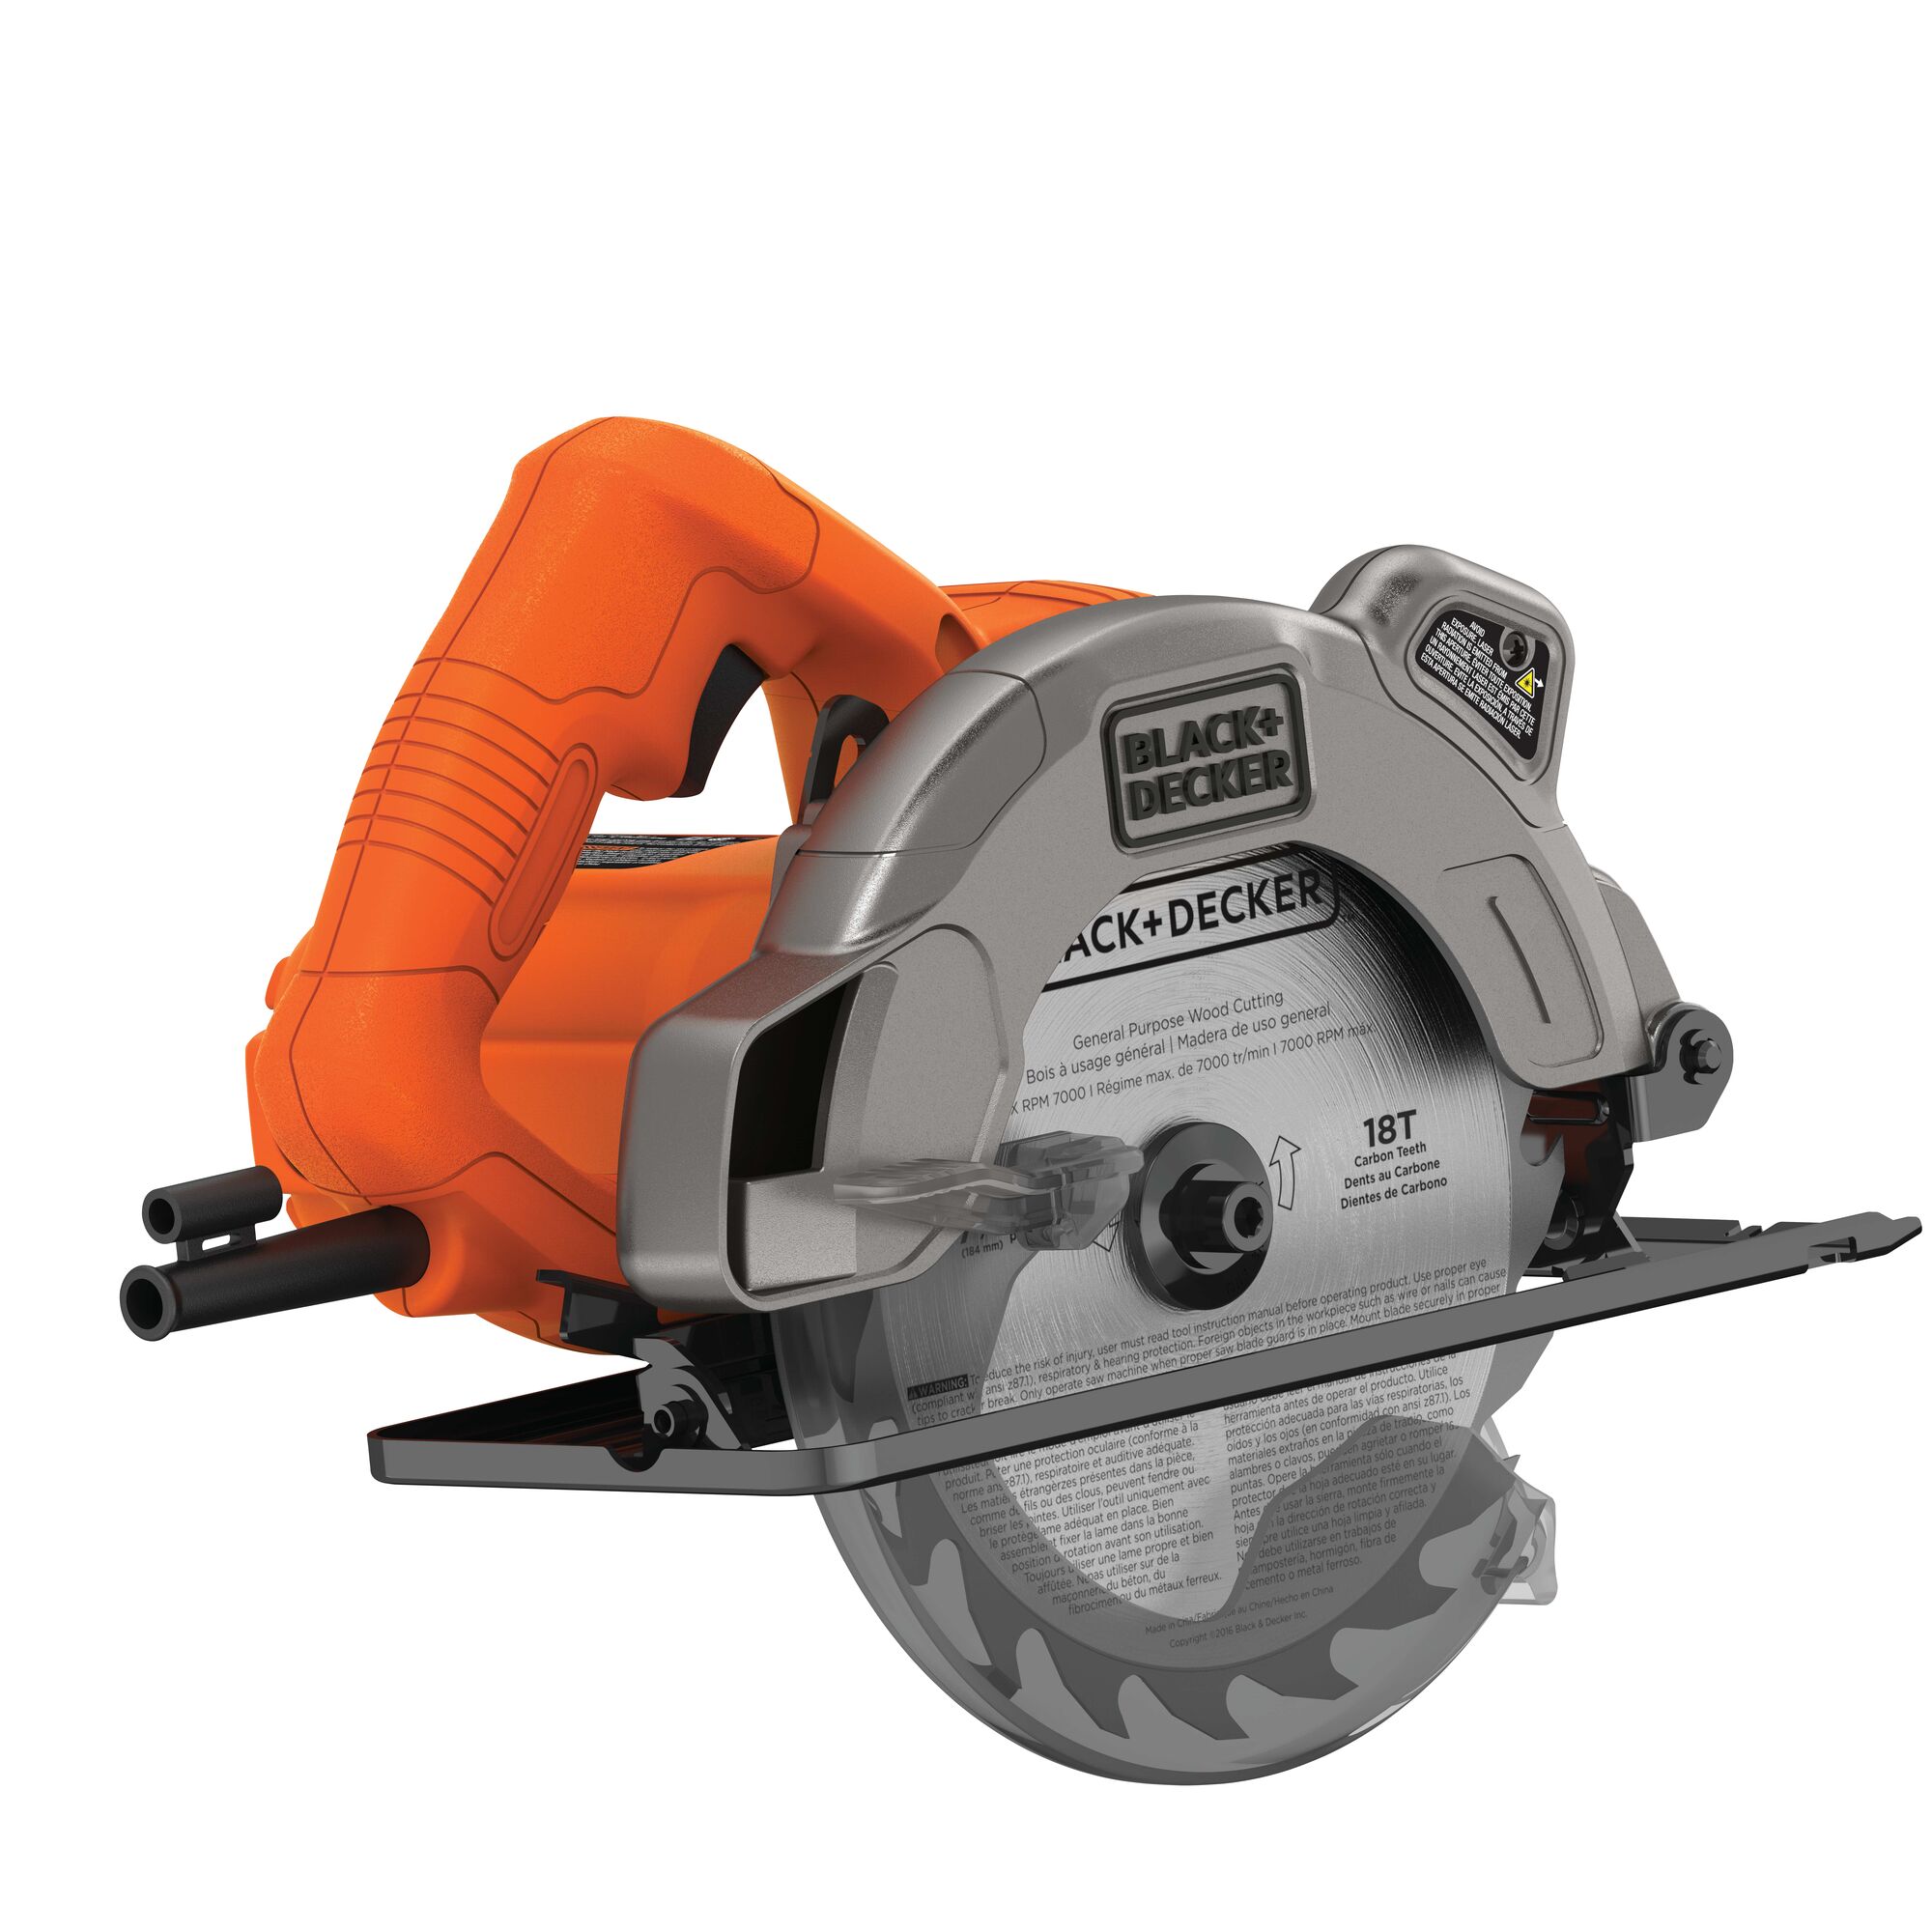 Black and decker 7-1/4-Inch Circular Saw With Laser, 13-Amp